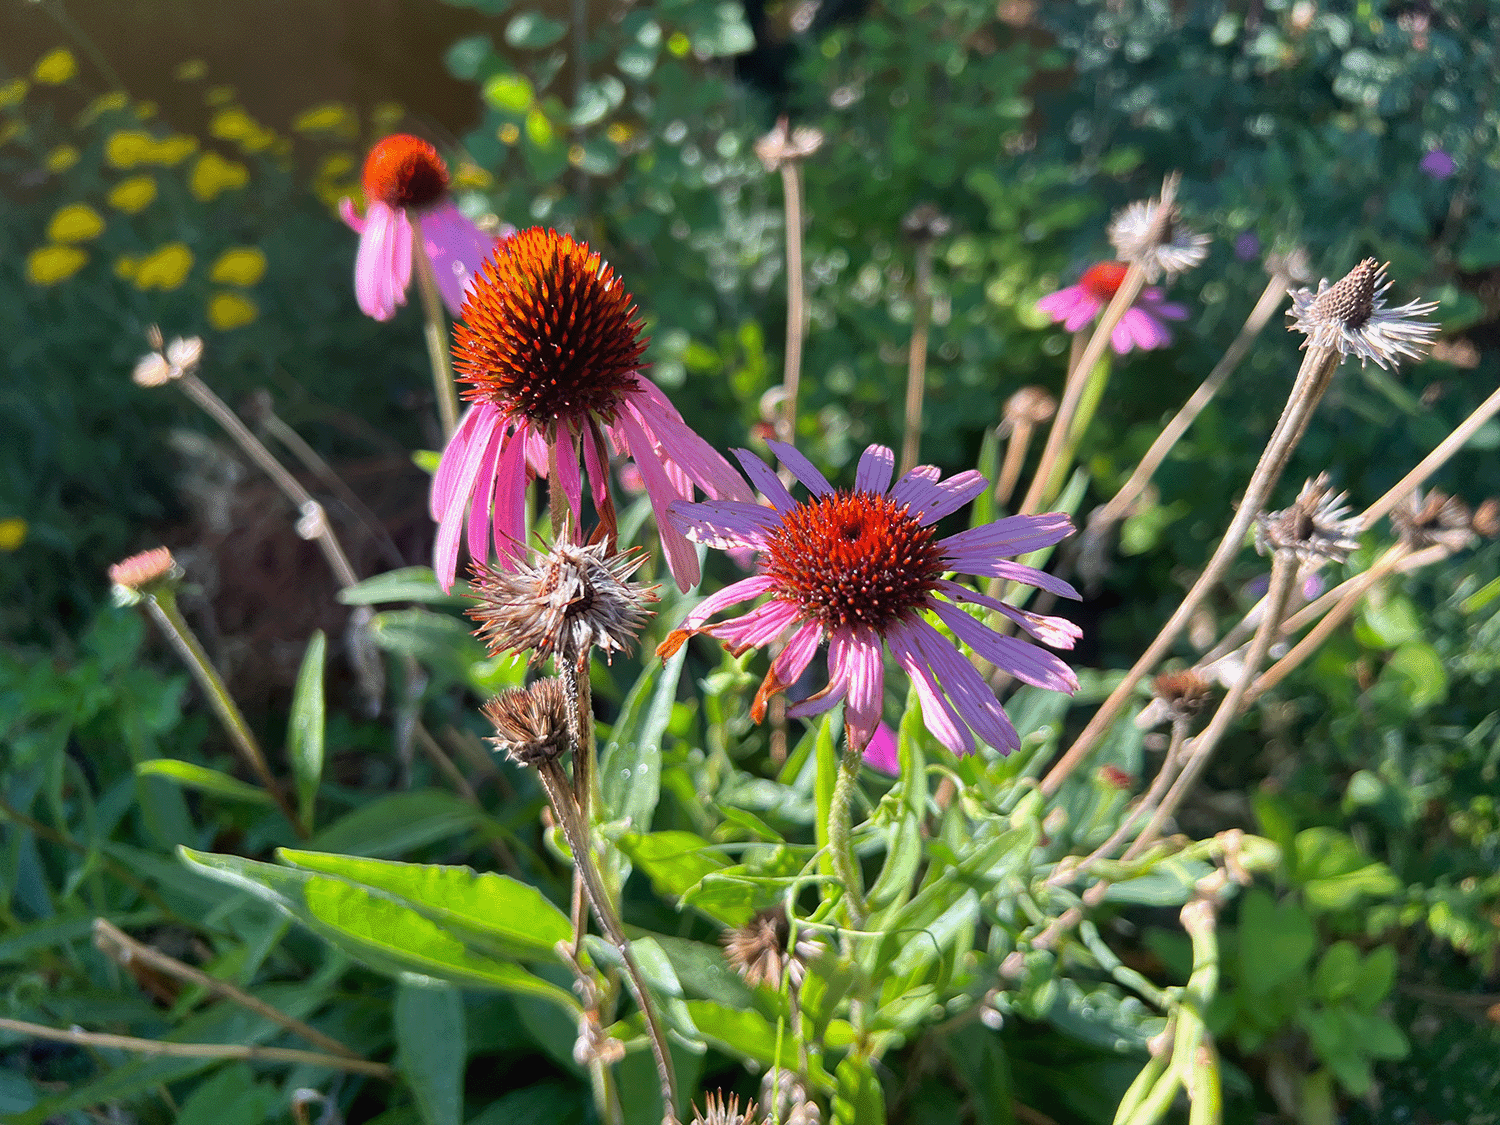 Close-up image of a blooming Echinacea plant (Echinacea purpurea) grown at Sacred Plant Co's Low Water Regenerative Colorado Farm, known for sustainable farming practices.